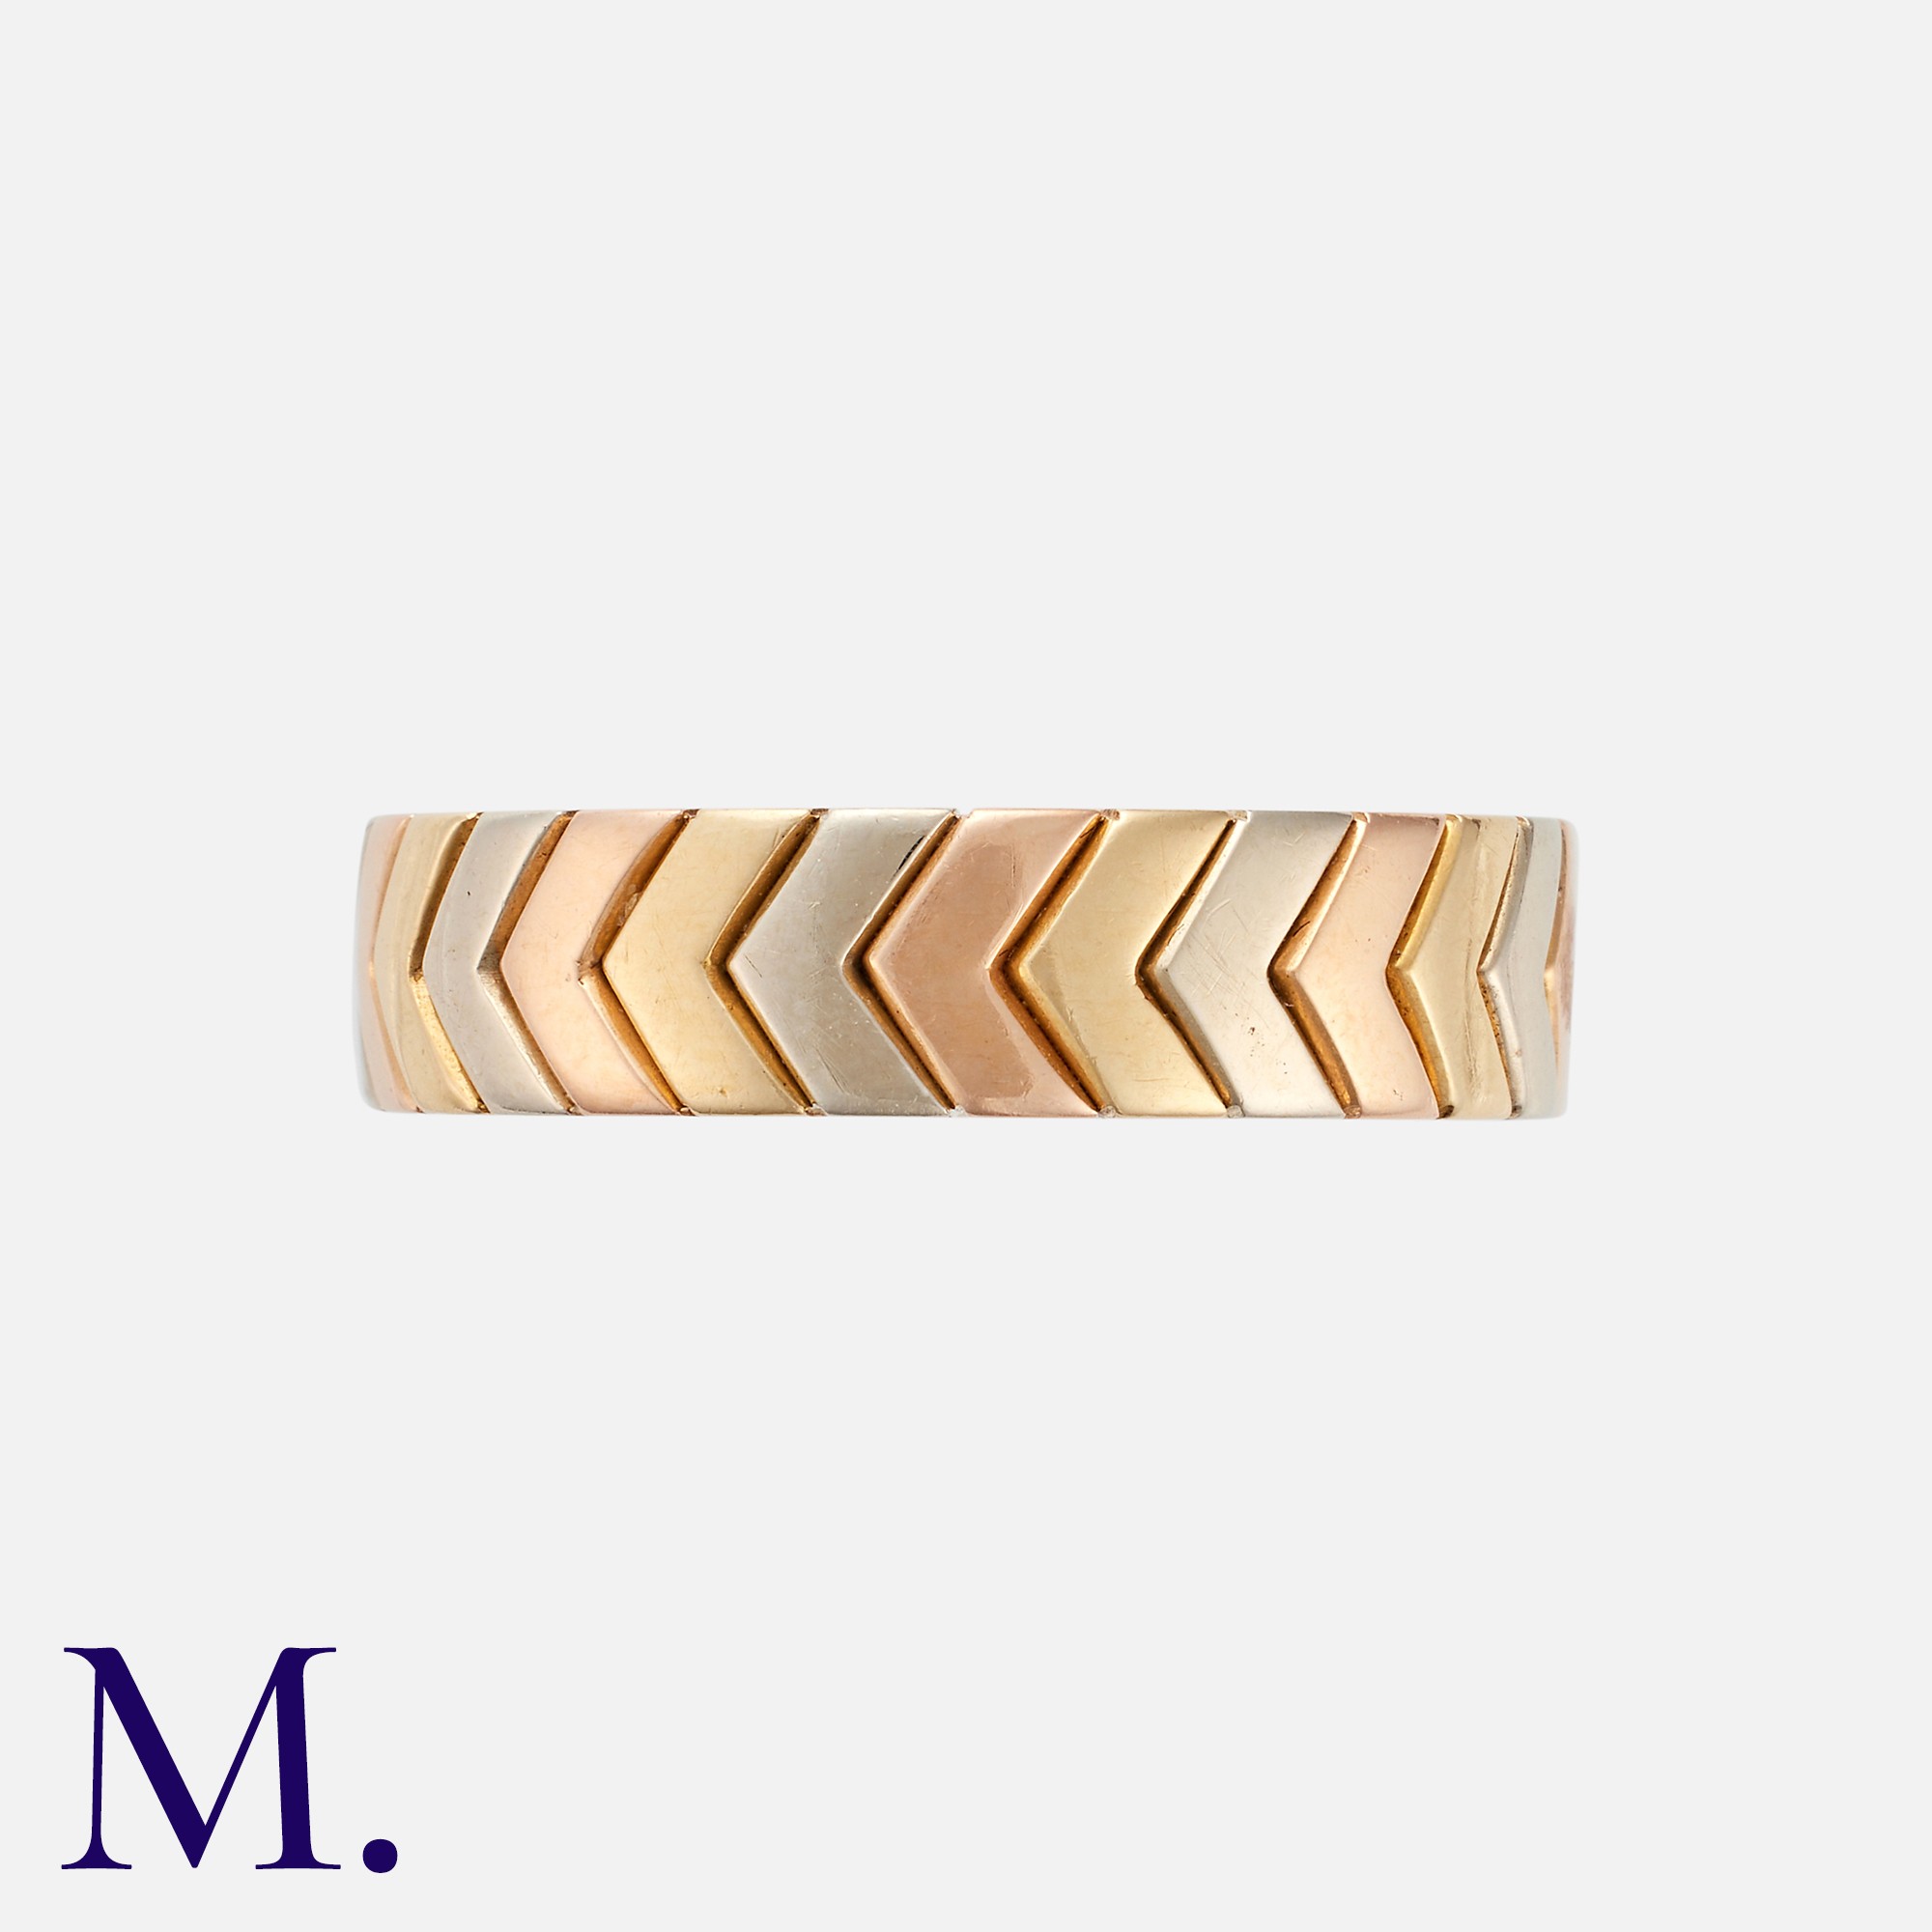 CARTIER. A Chevron Ring in 18K rose, white and yellow gold, in chevron form. Signed Cartier and